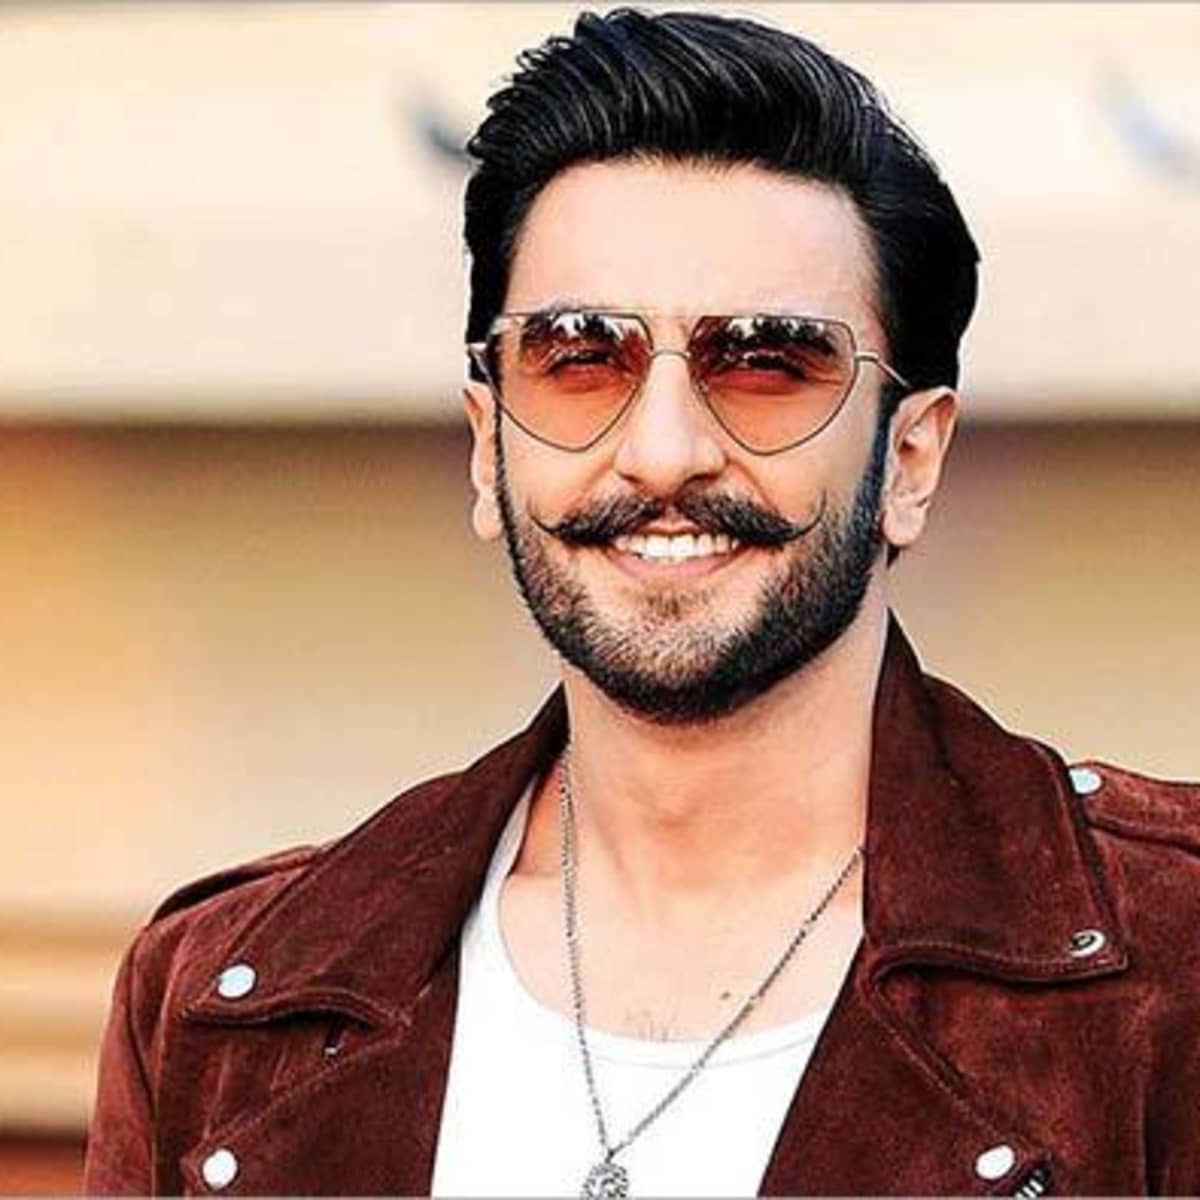 Ranveer Singh: A Hero of Our Time - Open The Magazine